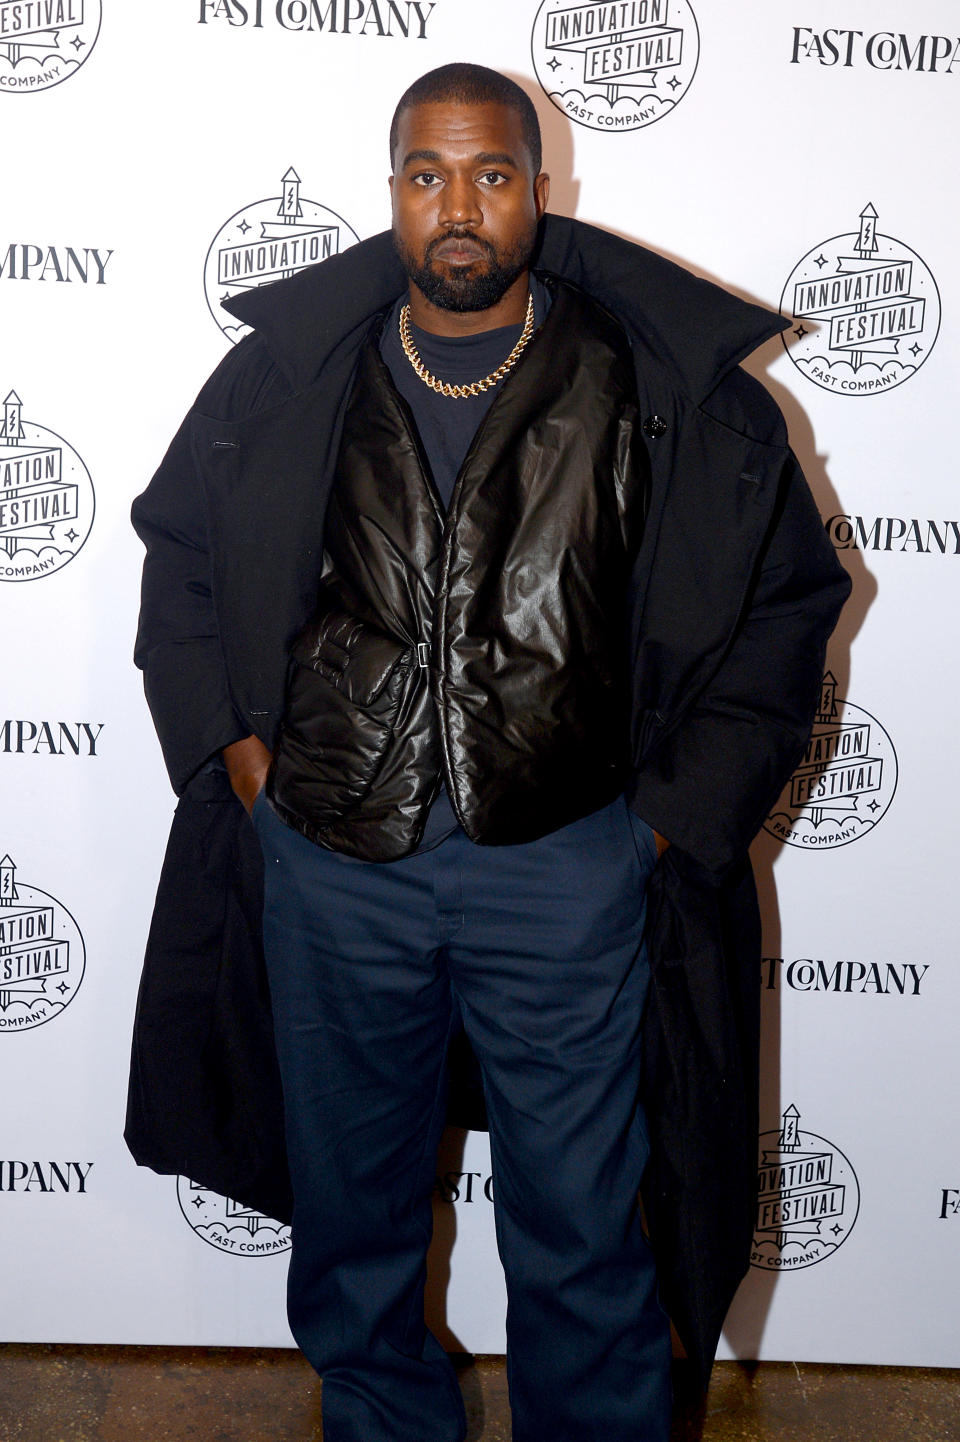 American rapper Kanye West wearing navy blue and black posing for picture at Fast Company Innovation Fest.